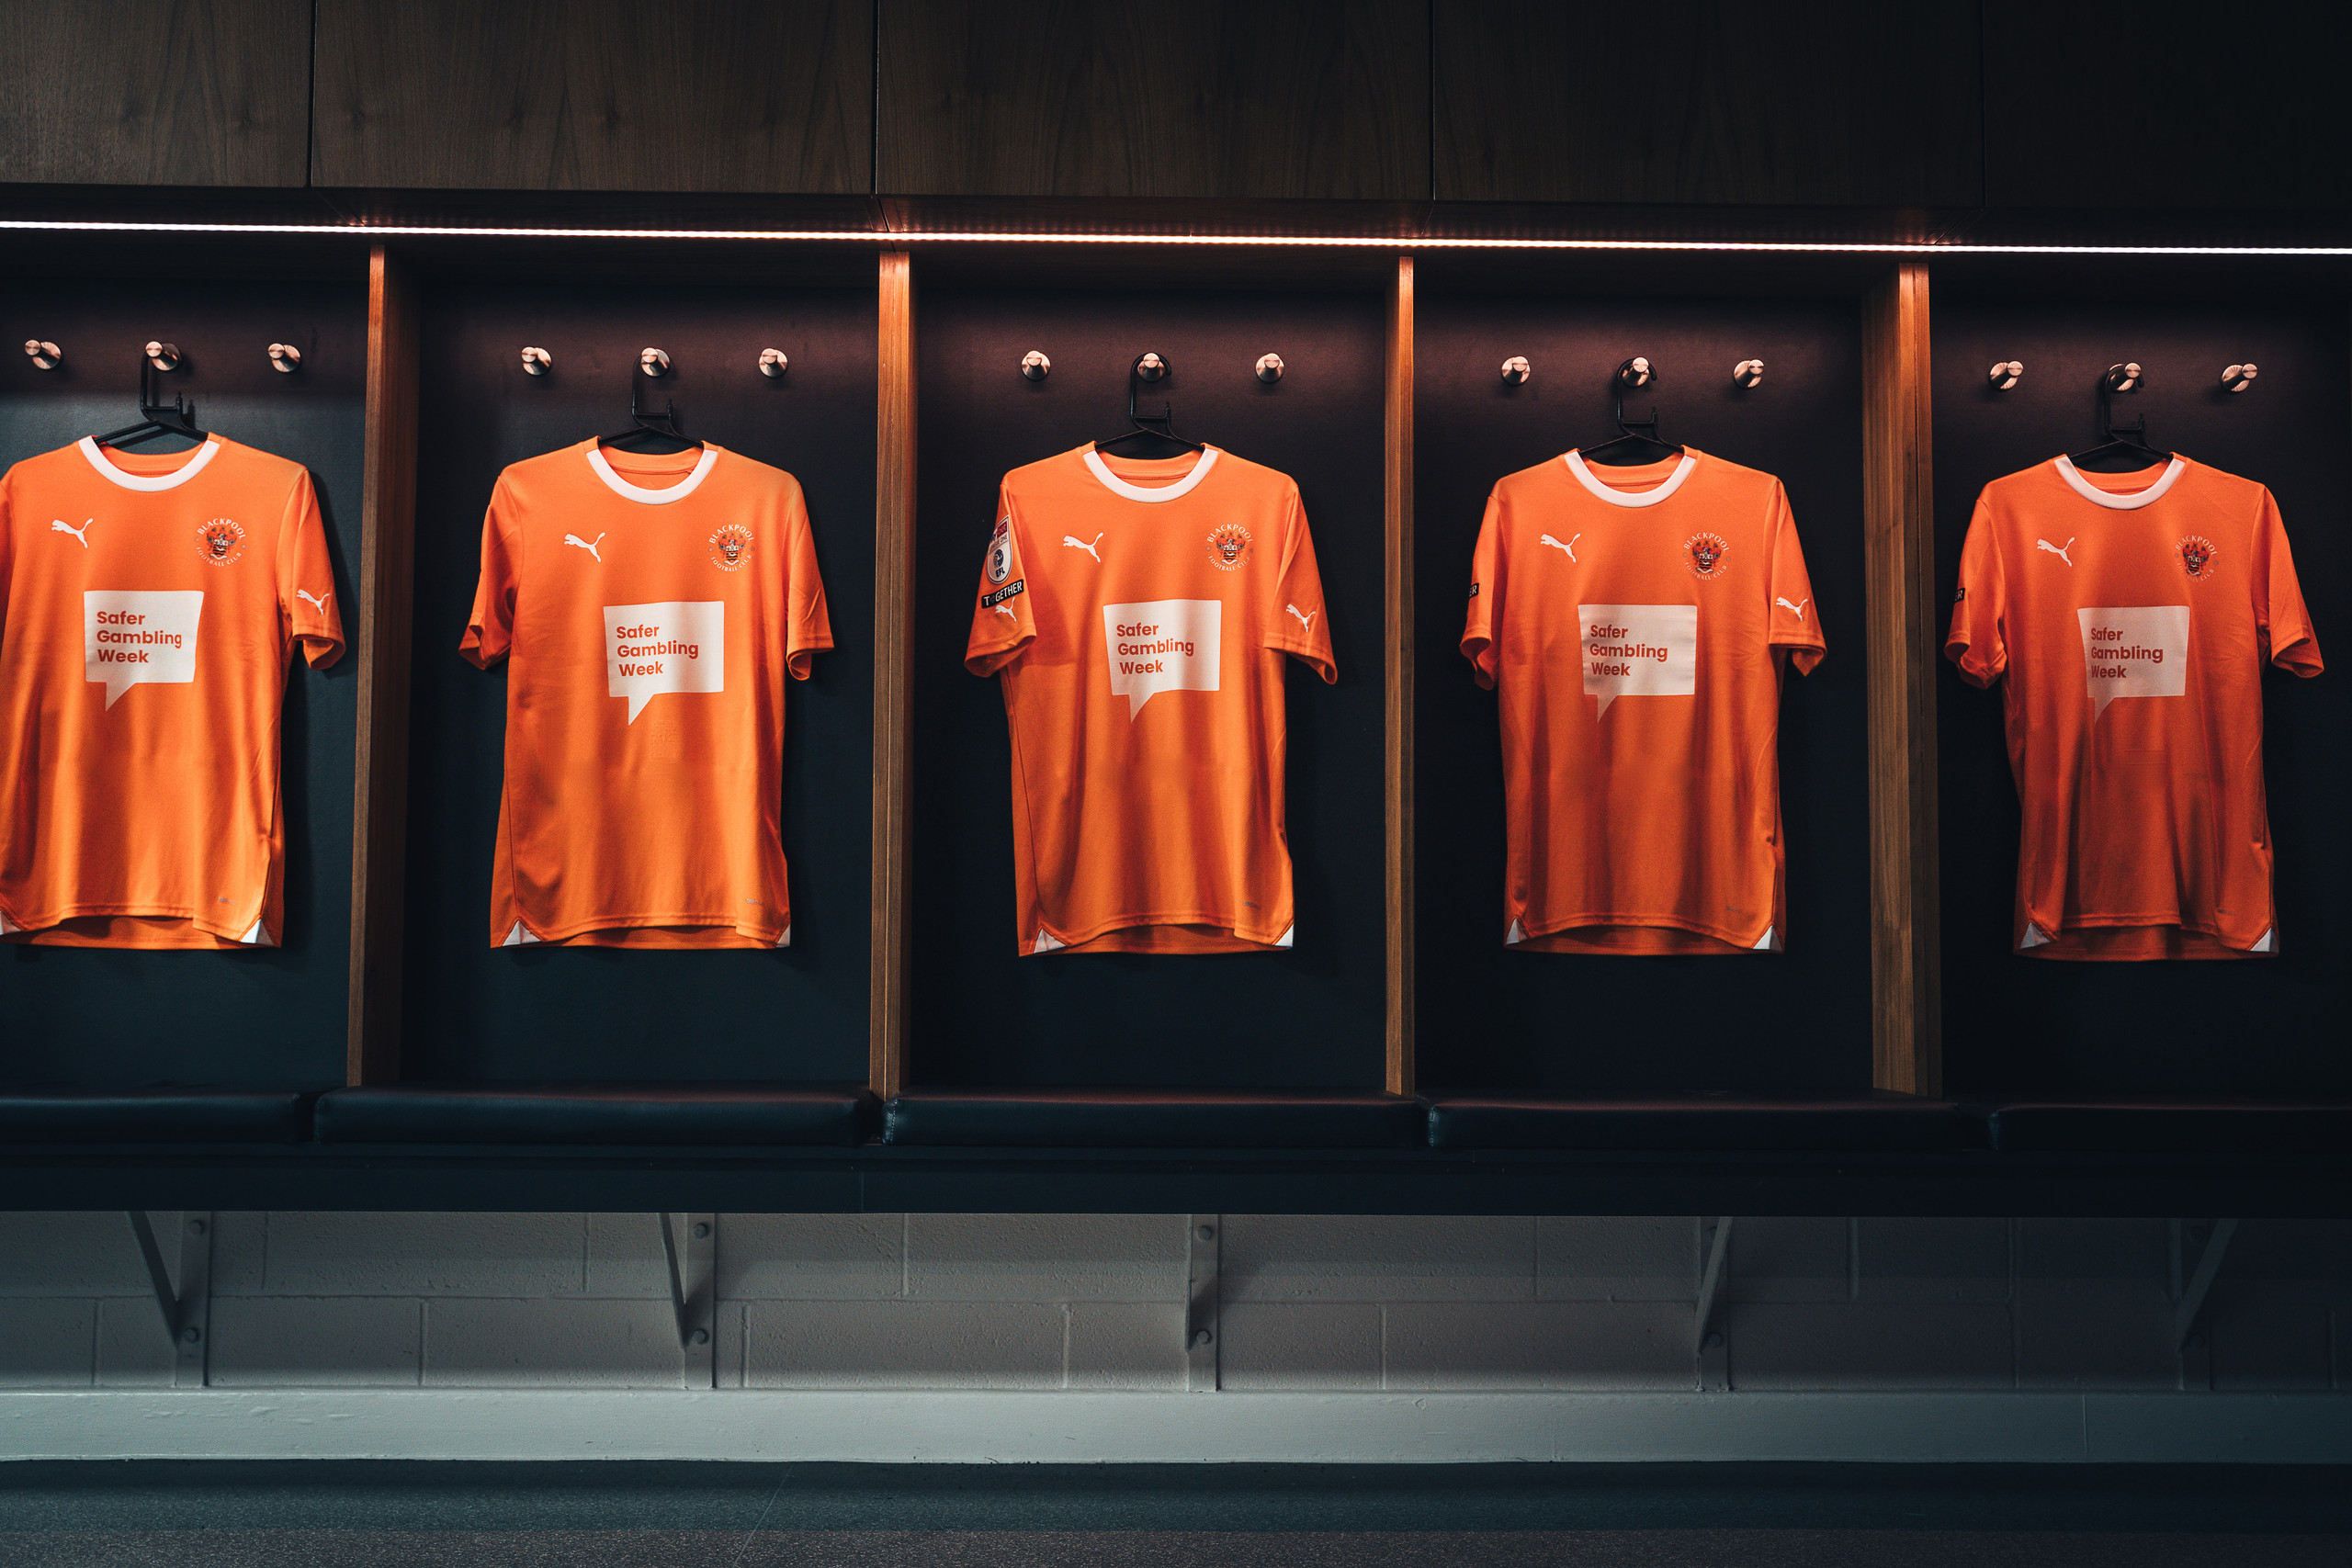 Blackpool FC features Safer Gambling logos on team shirts in collaboration with LeoVegas